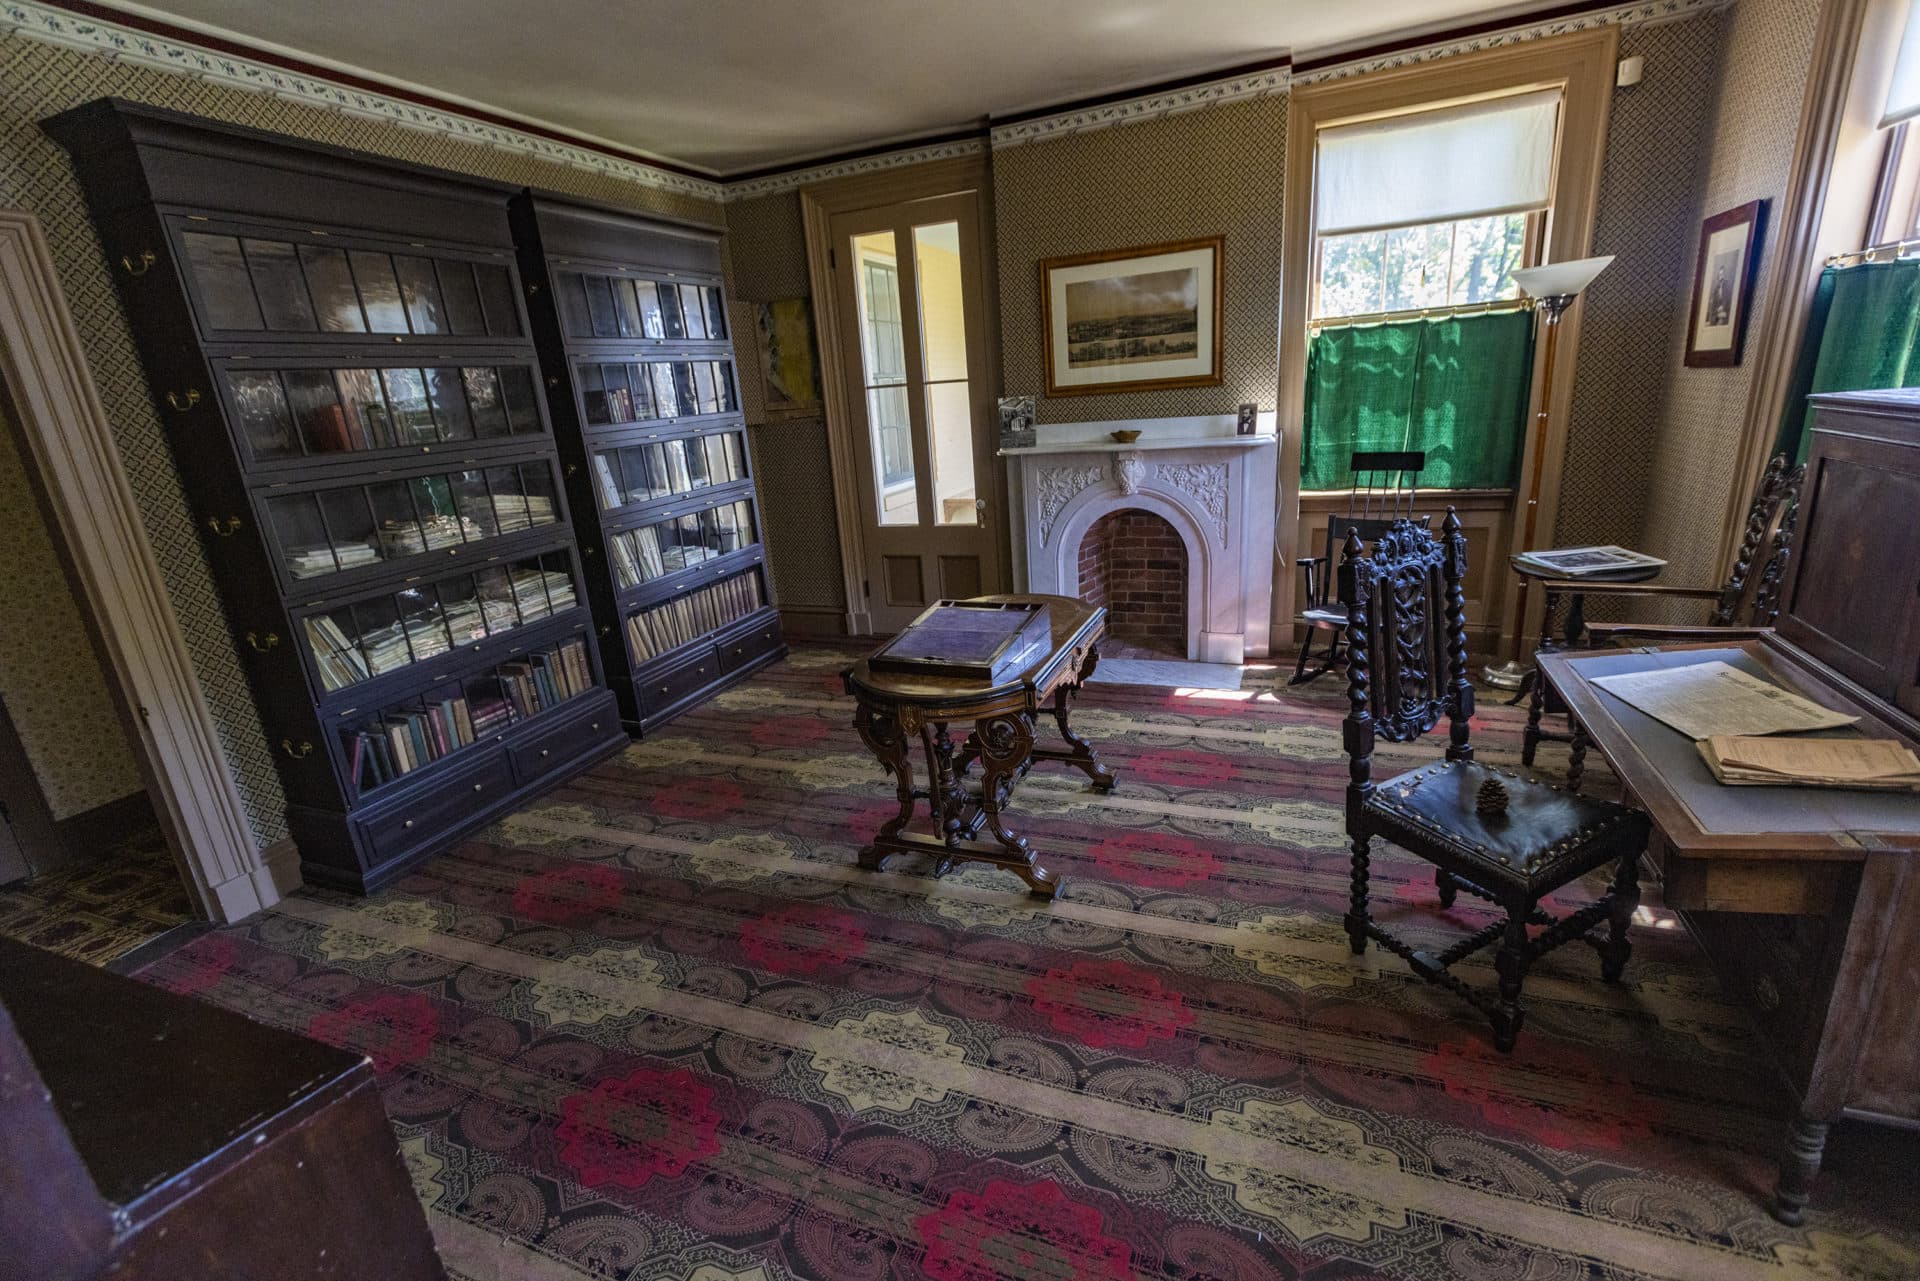 The study in Emily Dickinson's home-turned-museum looks more lived in with bookcases and papers used on set while filming the Apple TV+ series. (Jesse Costa/WBUR)